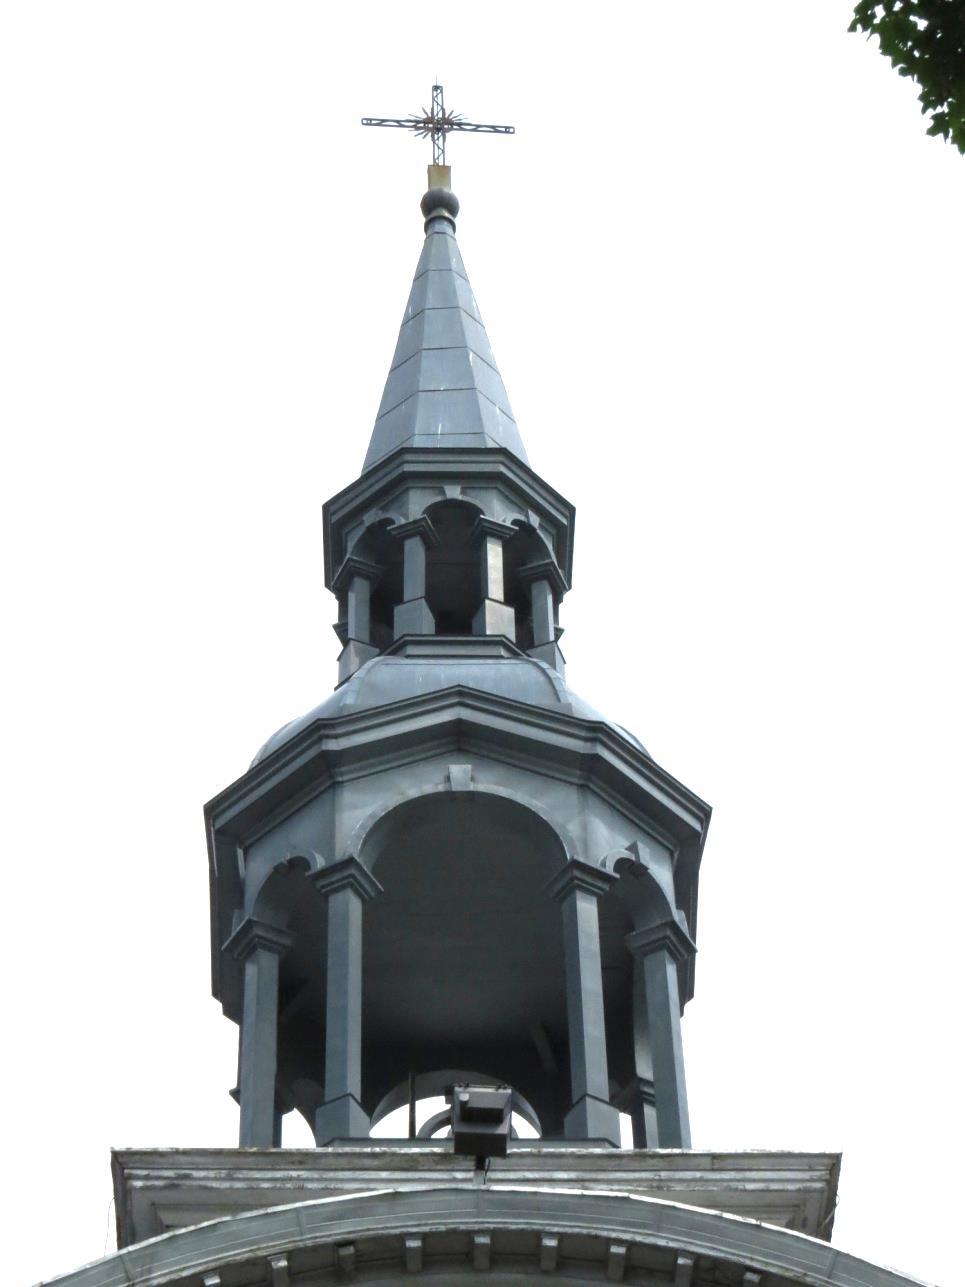 In 1895, the spire was built and installed by master